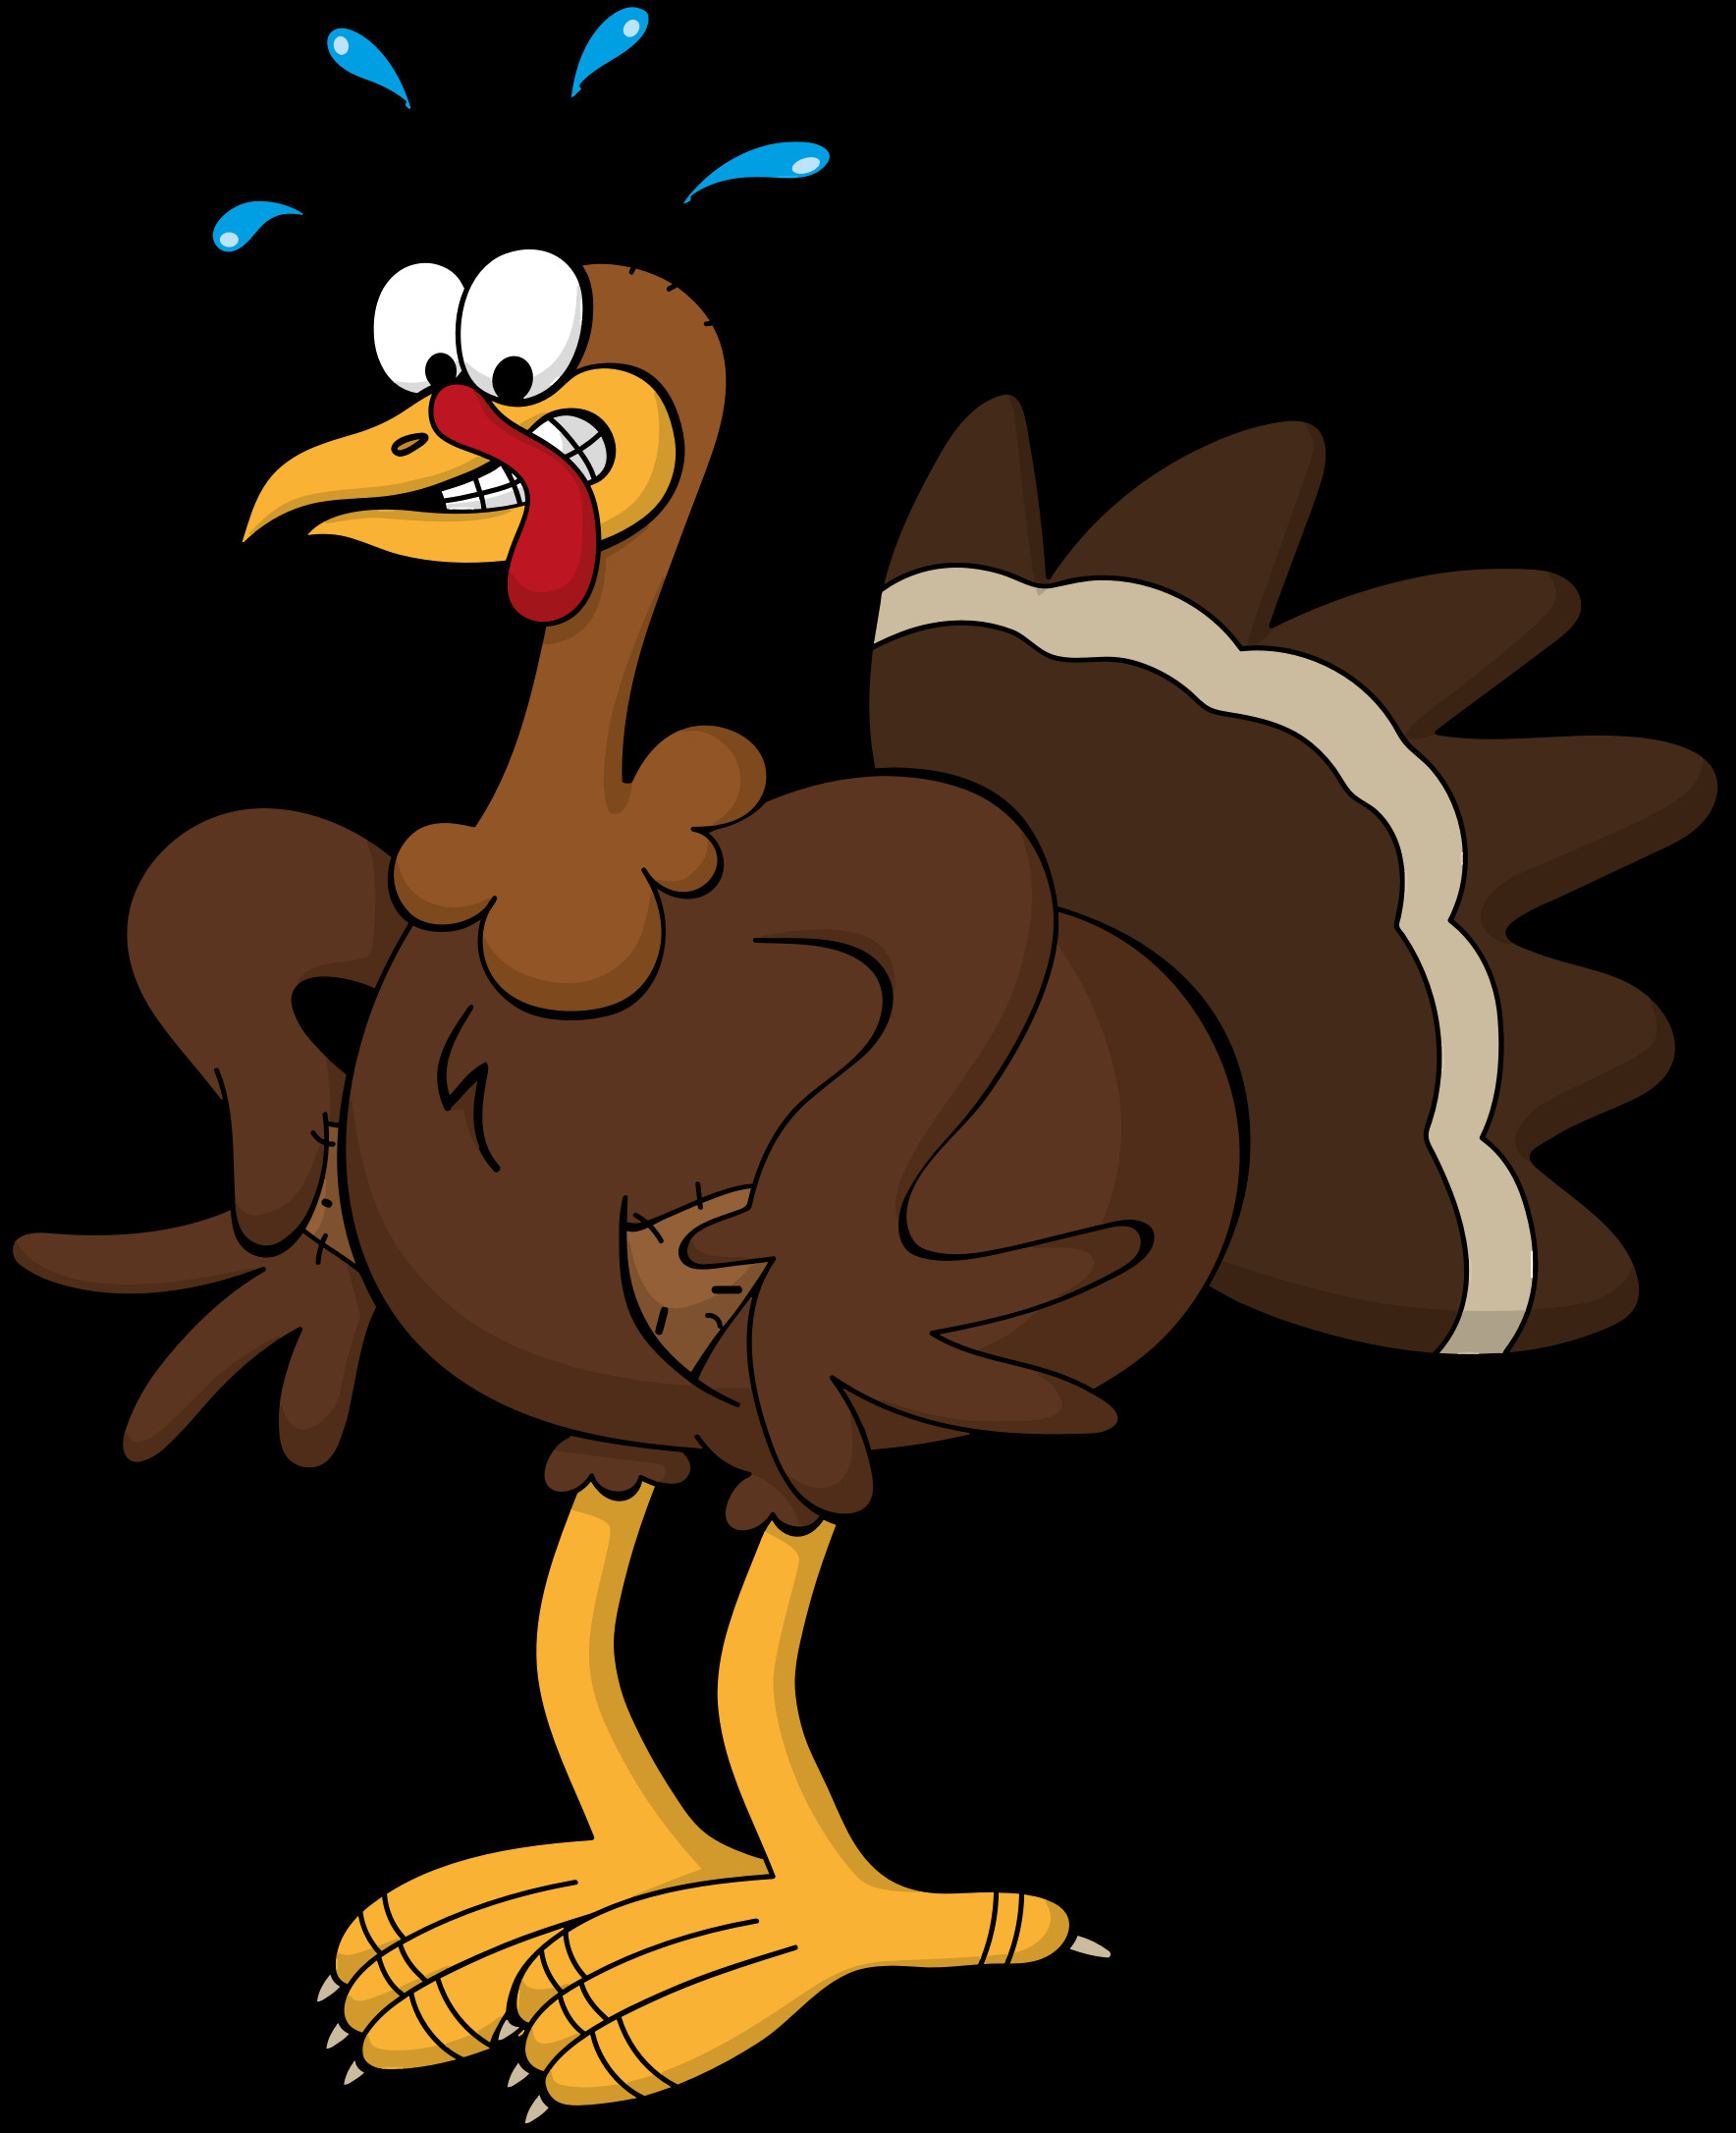 Thanksgiving Cartoon Turkey
 Turkey clipart ic Pencil and in color turkey clipart